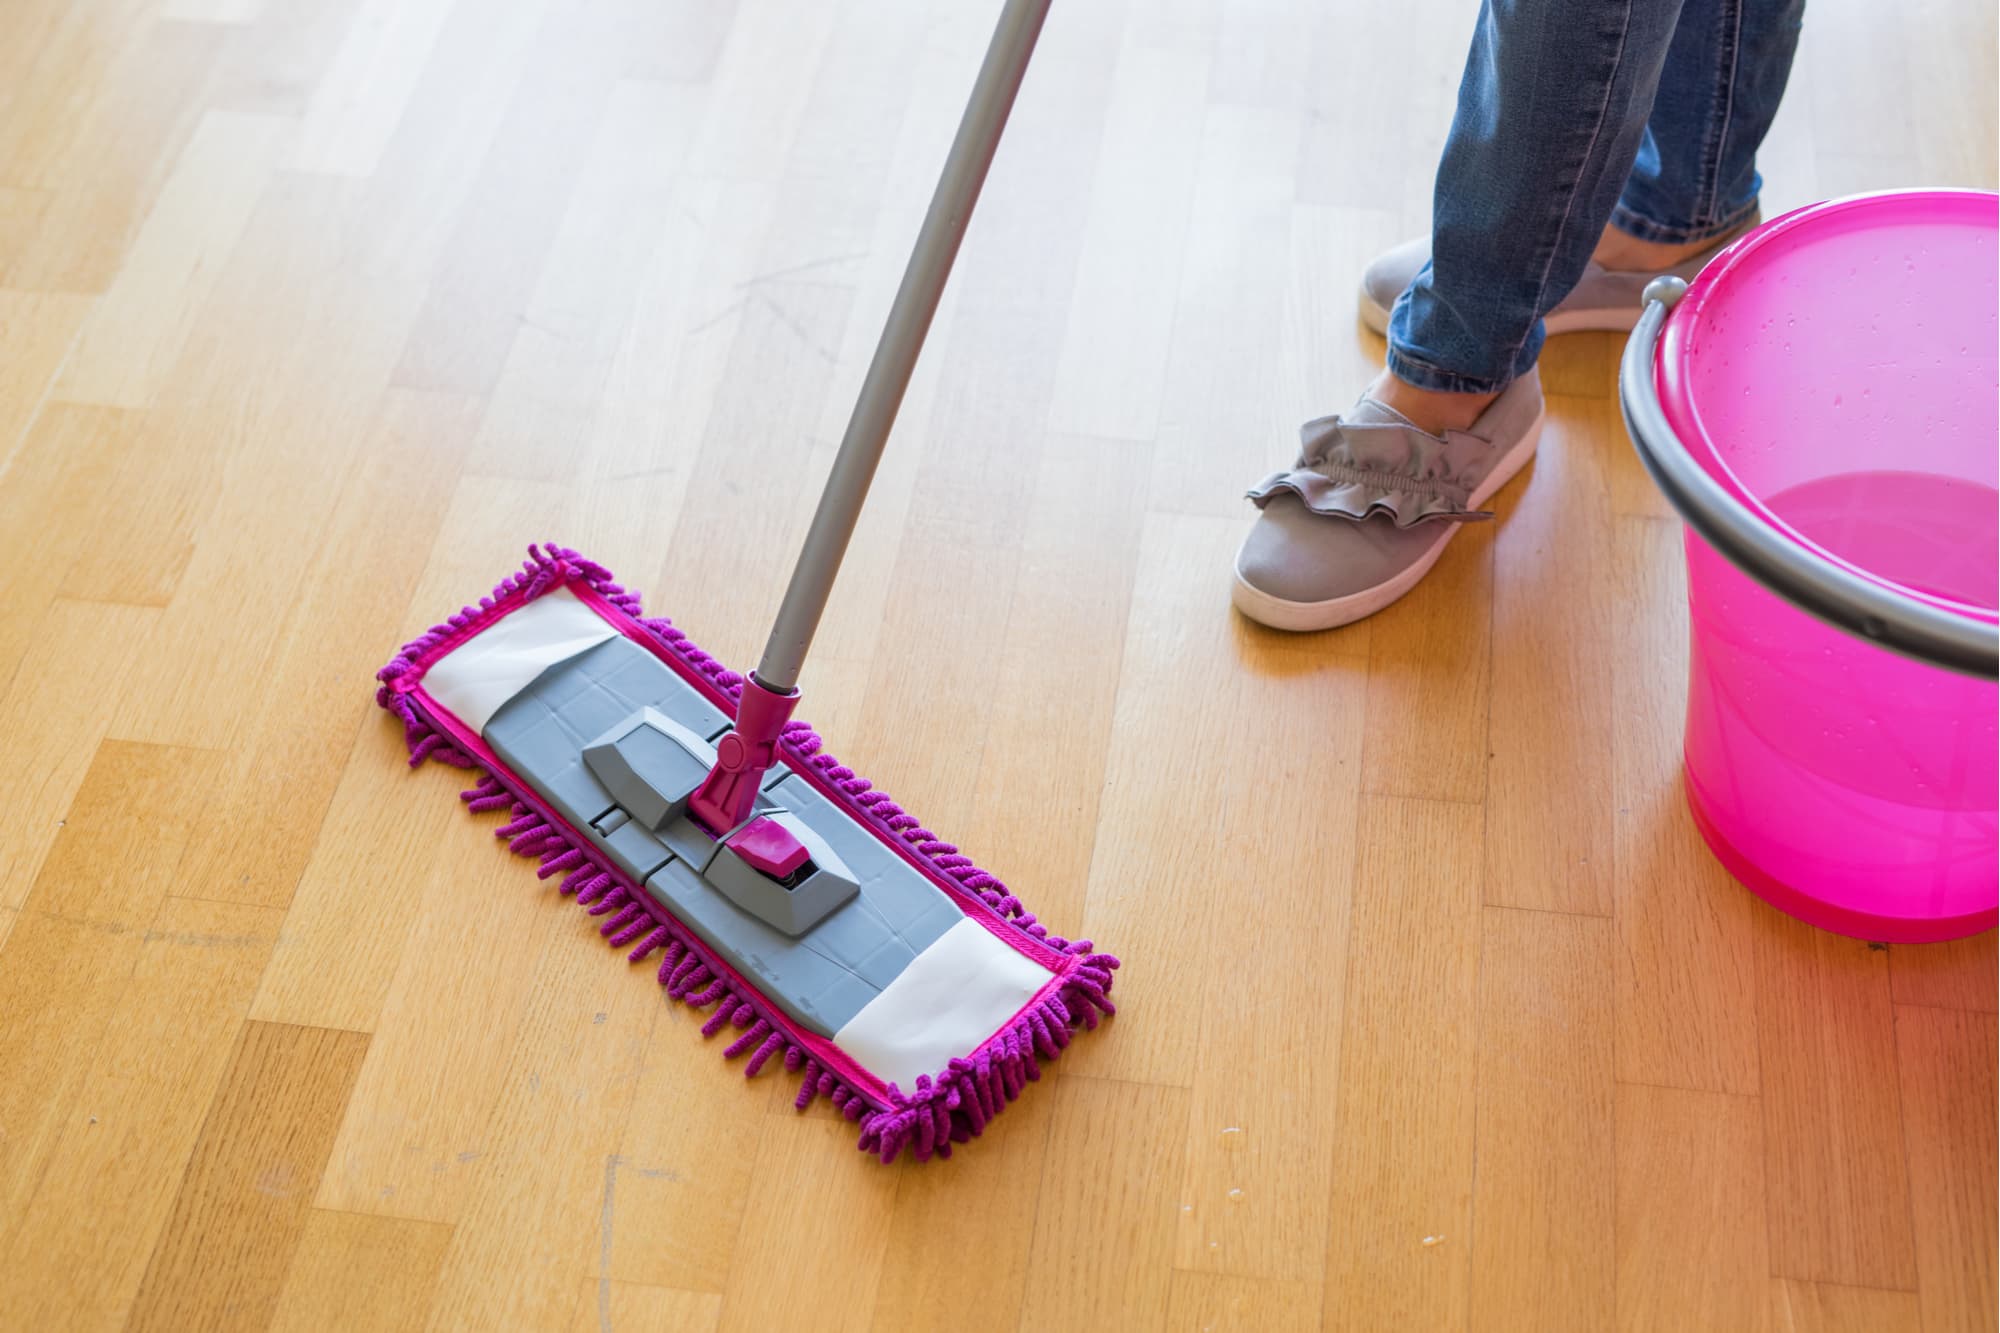 https://cdn.apartmenttherapy.info/image/upload/v1576775380/at/organize-clean/mopping-floors.jpg